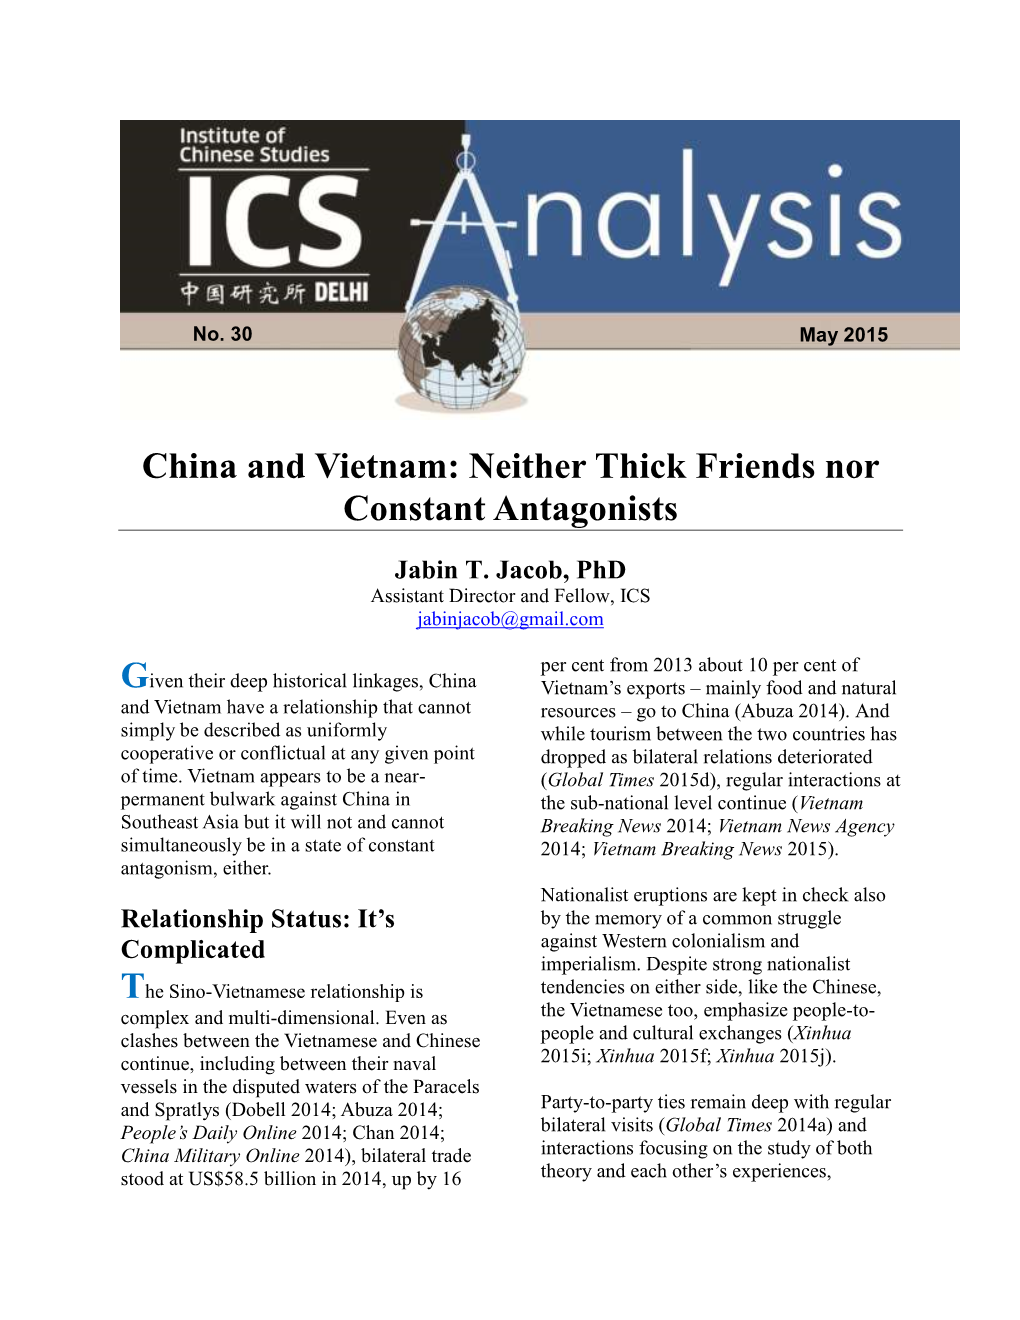 China and Vietnam: Neither Thick Friends Nor Constant Antagonists